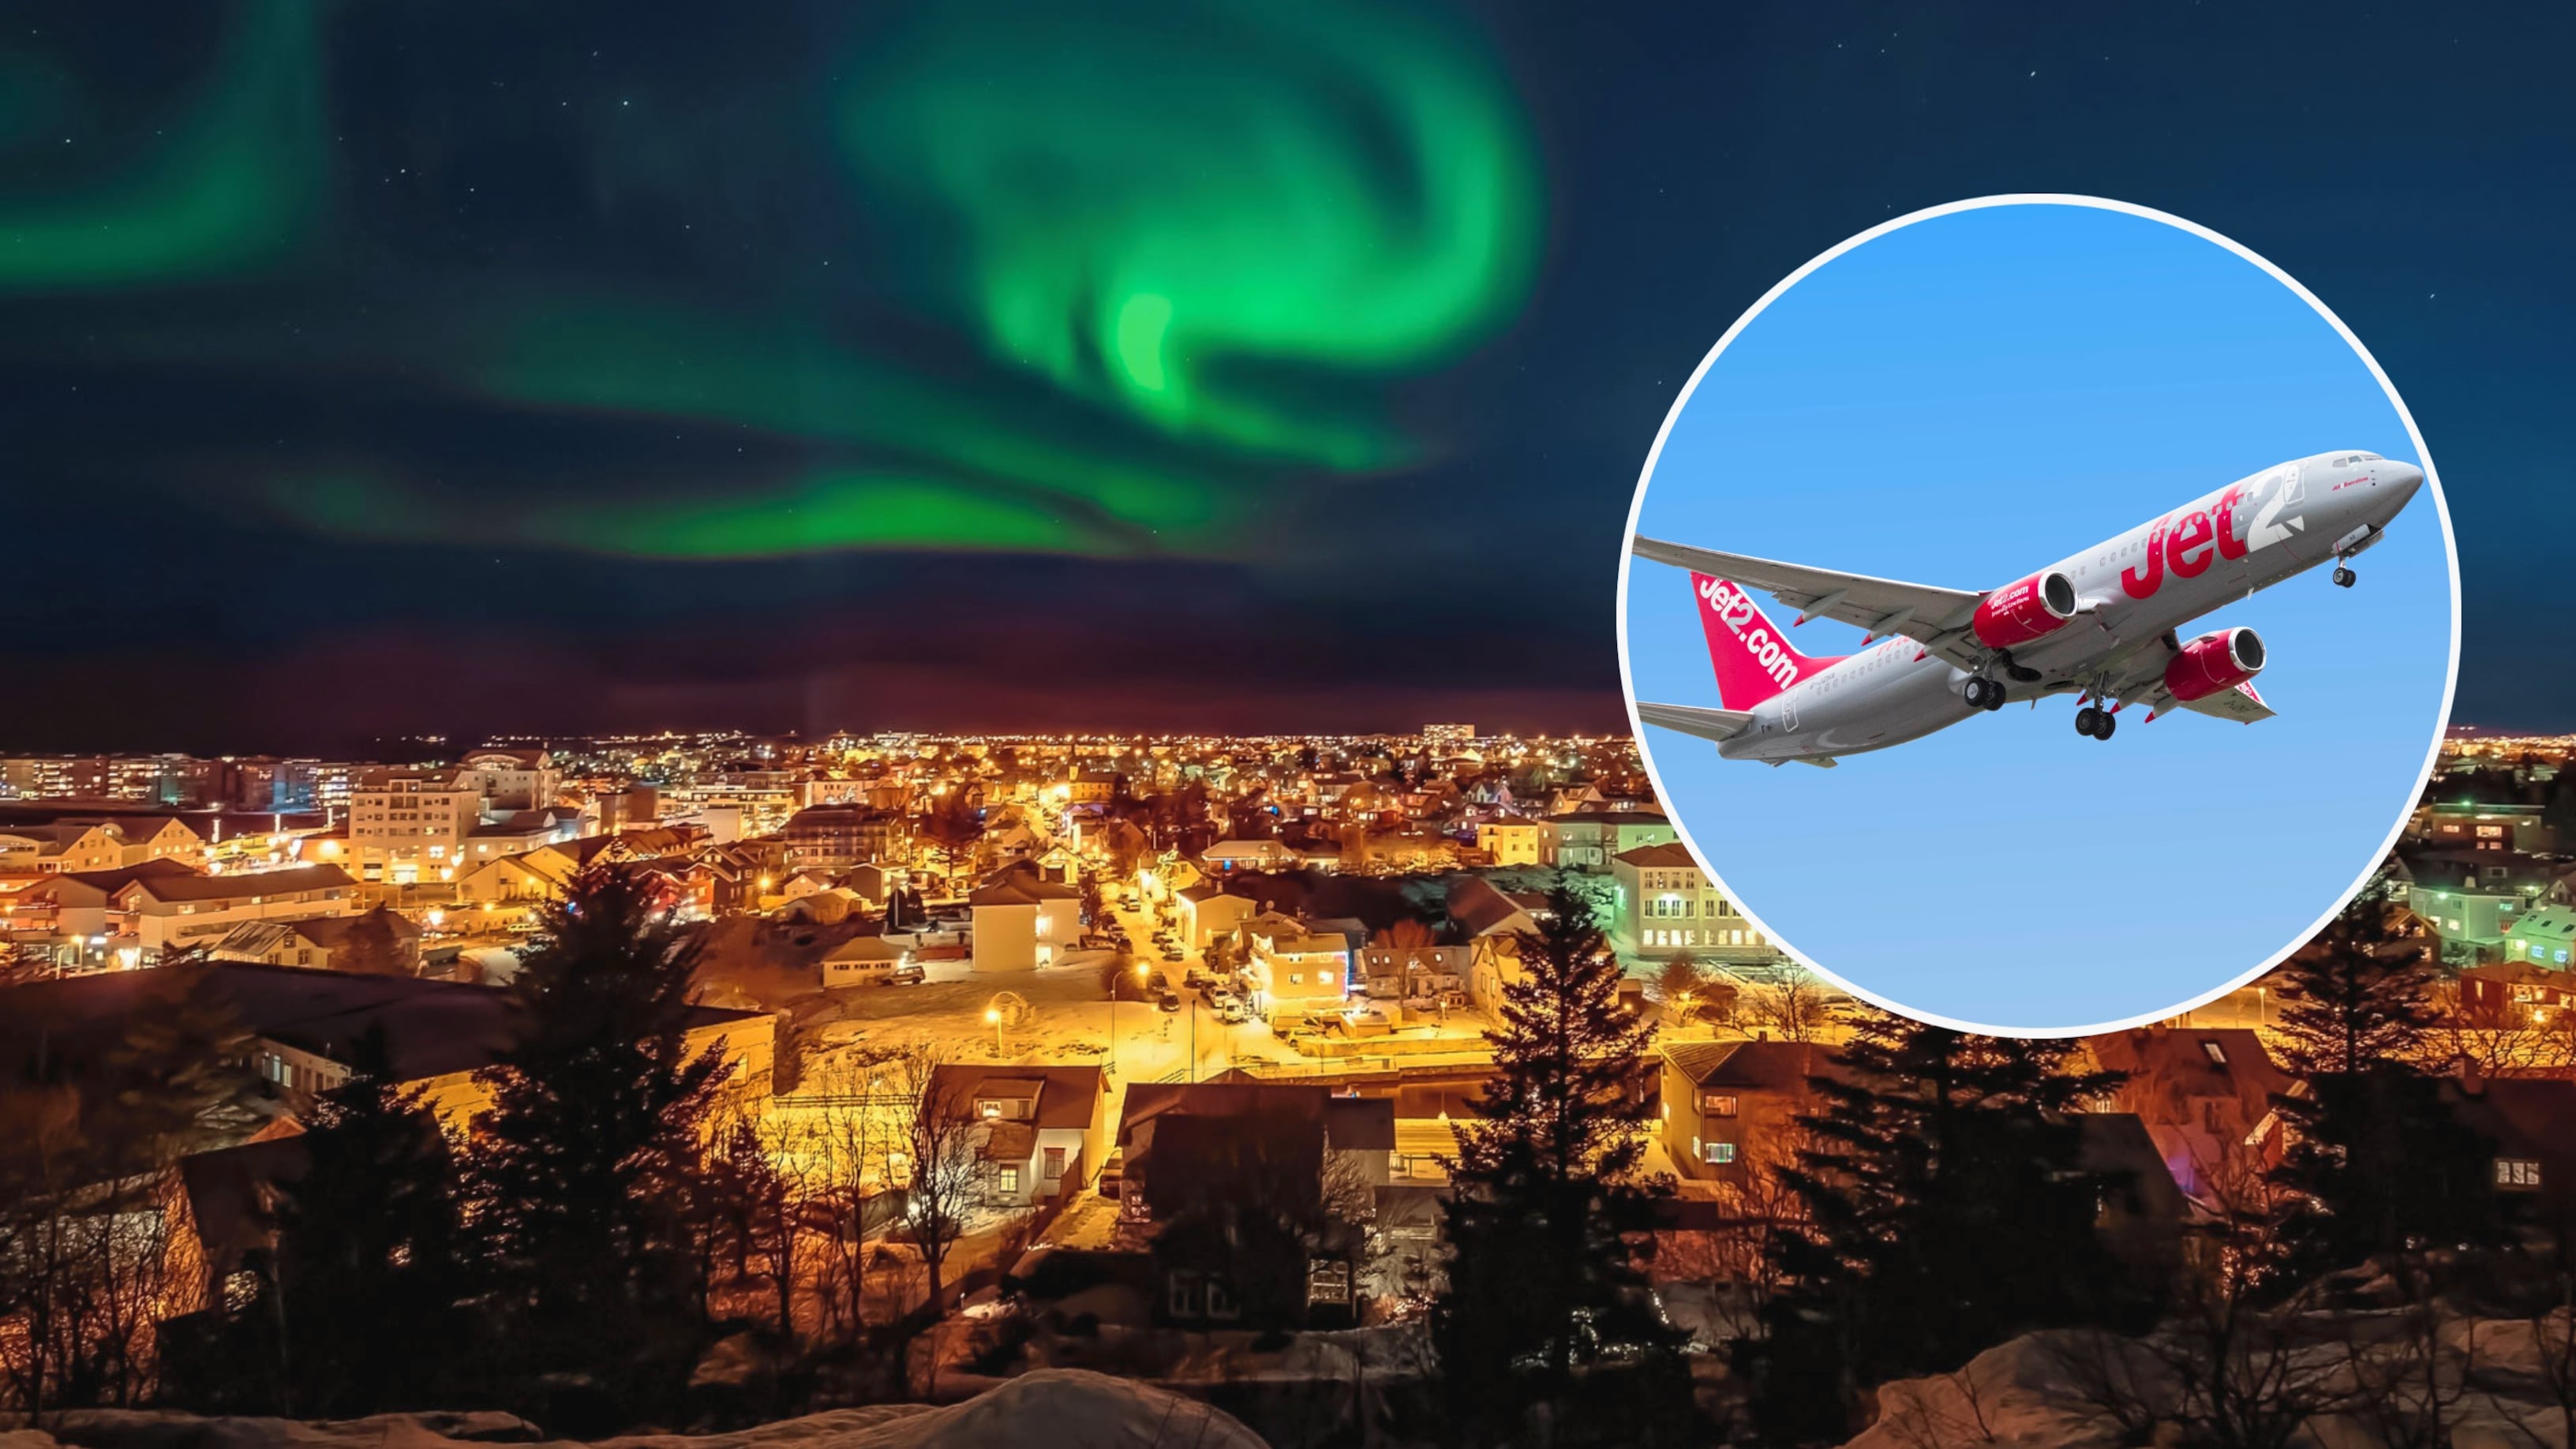 A view over an Icelandic town at night with the green Northern Lights visible in the sky. Inset is a Jet2 aircraft.